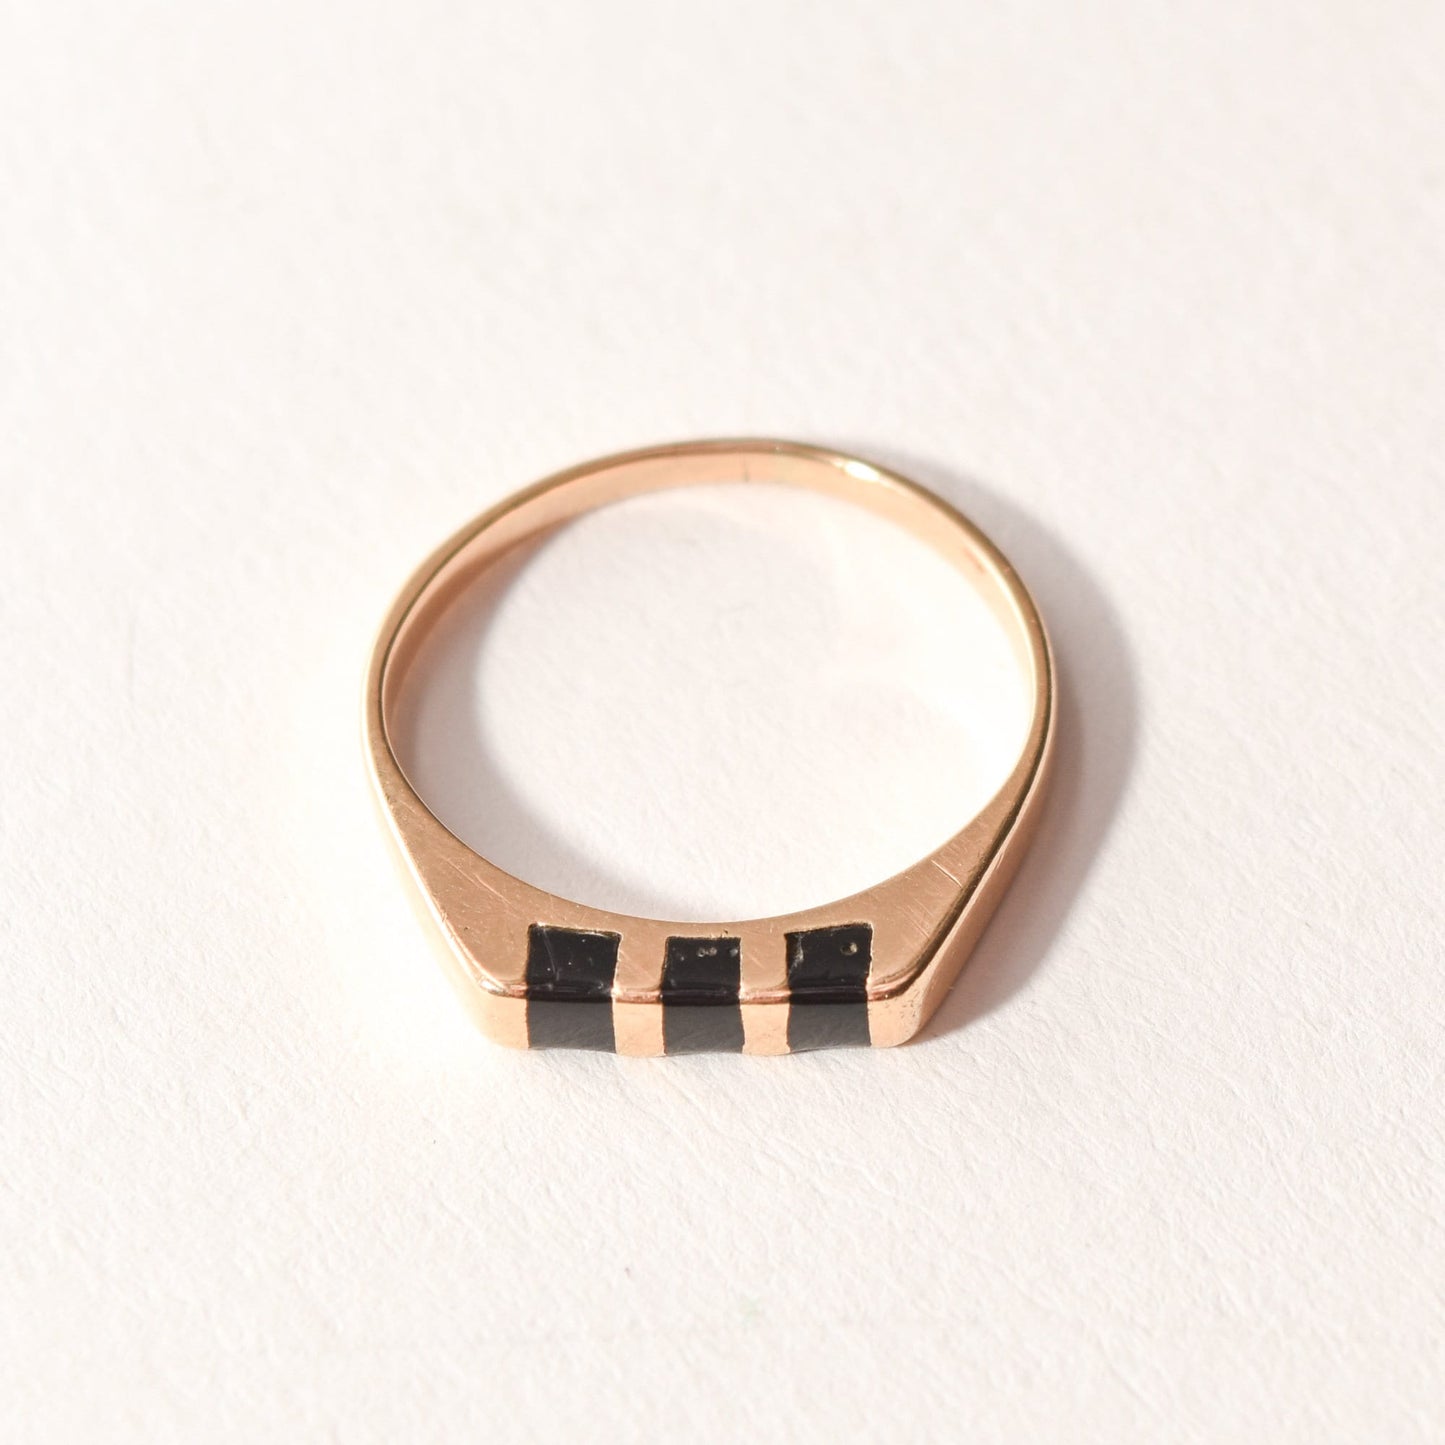 Minimalist 14K yellow gold stacking ring with black onyx inlay, size 5.5 US, on white background.